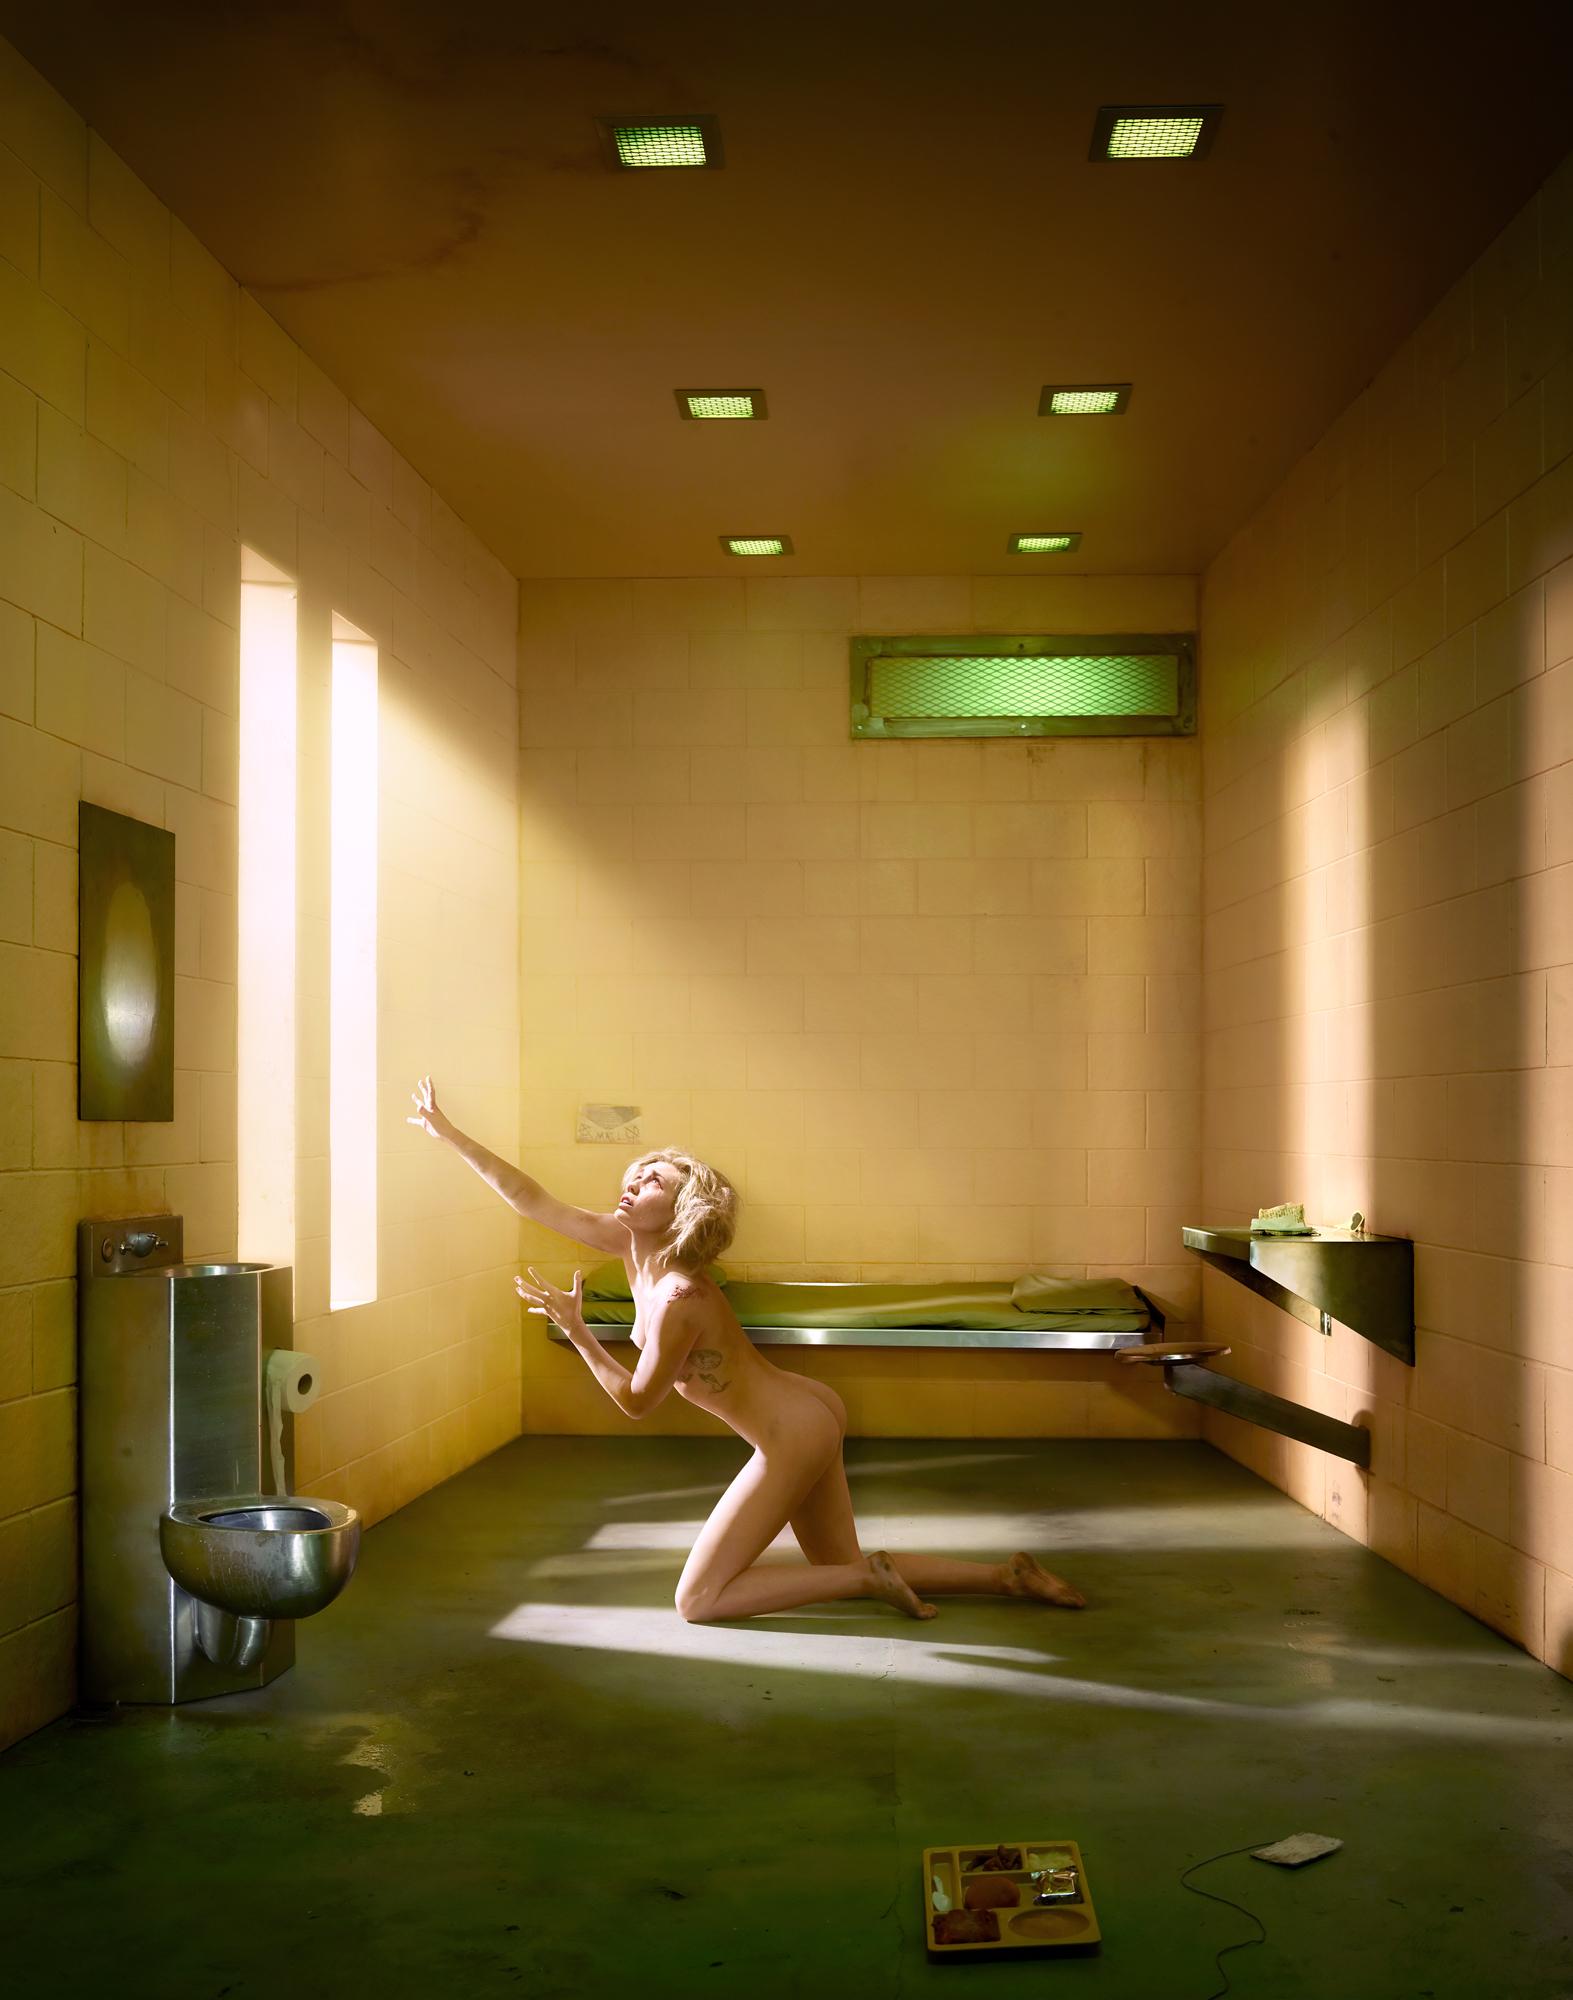 David LaChapelle Color Photograph - Miley Ray Cyrus: Solitary